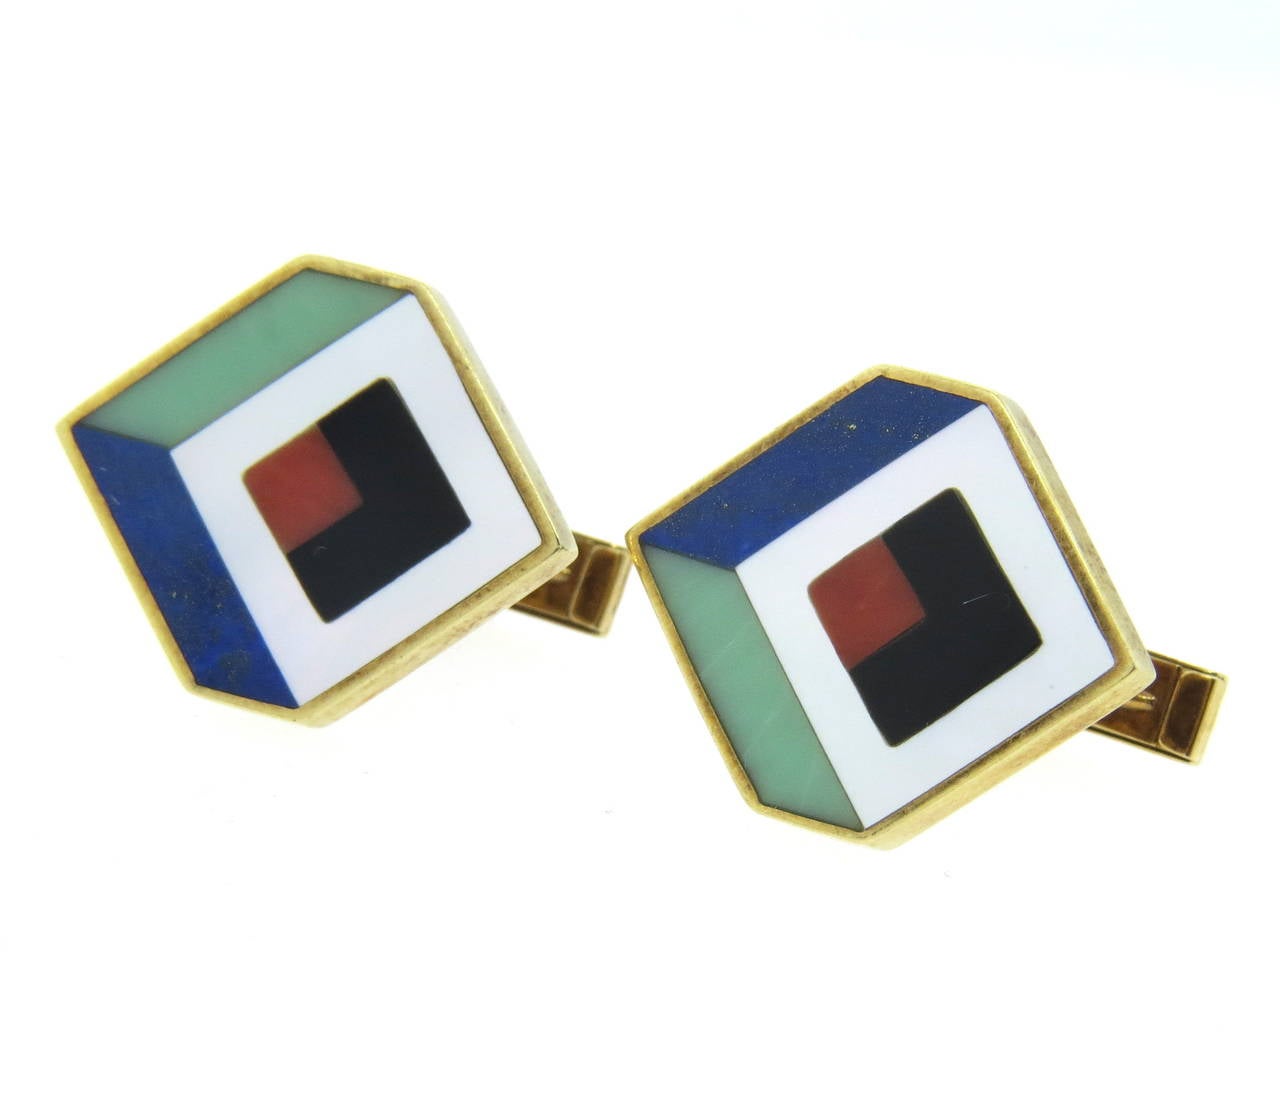 Unique 14k gold three dimensional cufflinks, featuring inlay gemstone top. Gemstones include coral, mother of pearl,onyx, lapis and jade. Top measures 20mm x 20mm. Weight - 15.4 grams